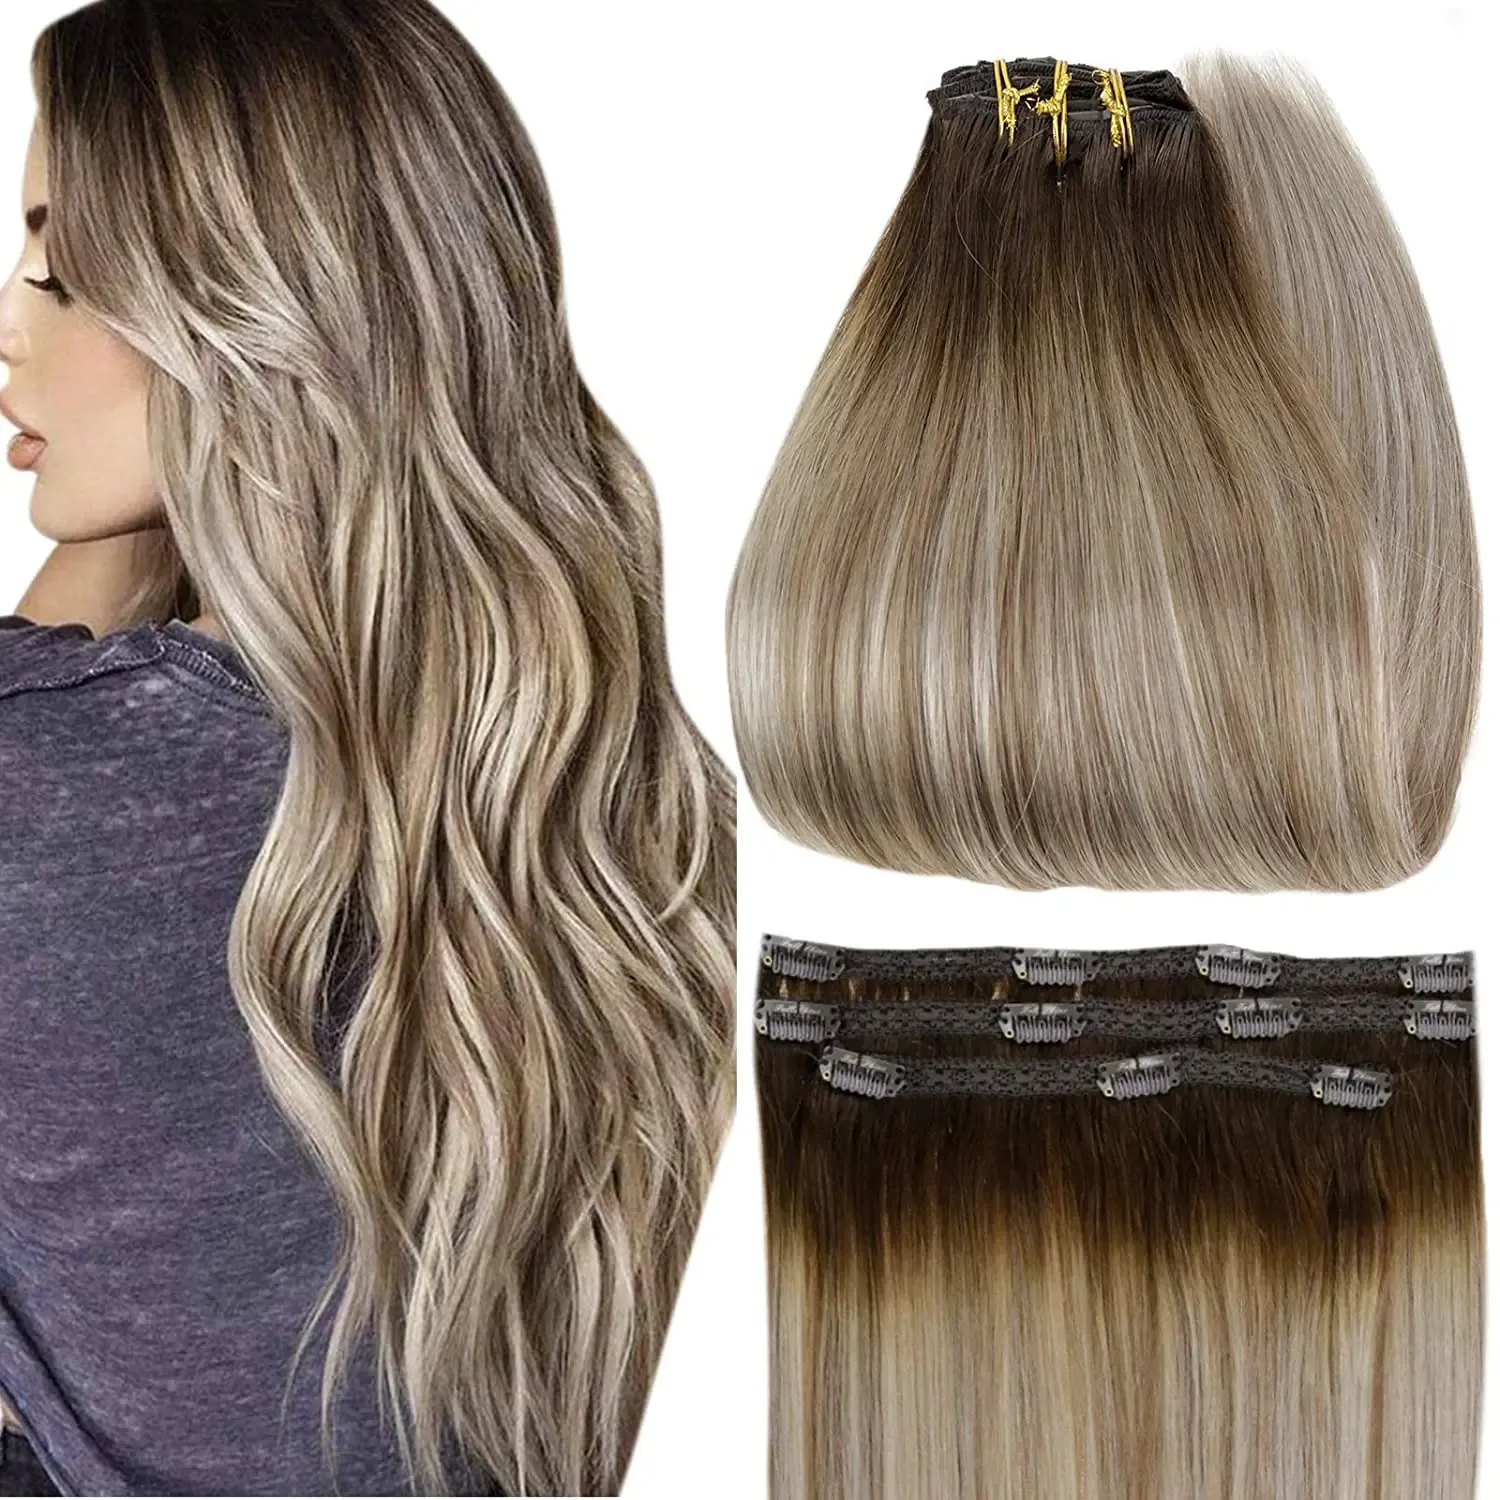 Extensions Full Shine 50 Grams Clip on Hair Extensions 3pcs Balayage Color 100% Remy Real Human Hair 3 Pieces Hairpins Skin Weft For Women